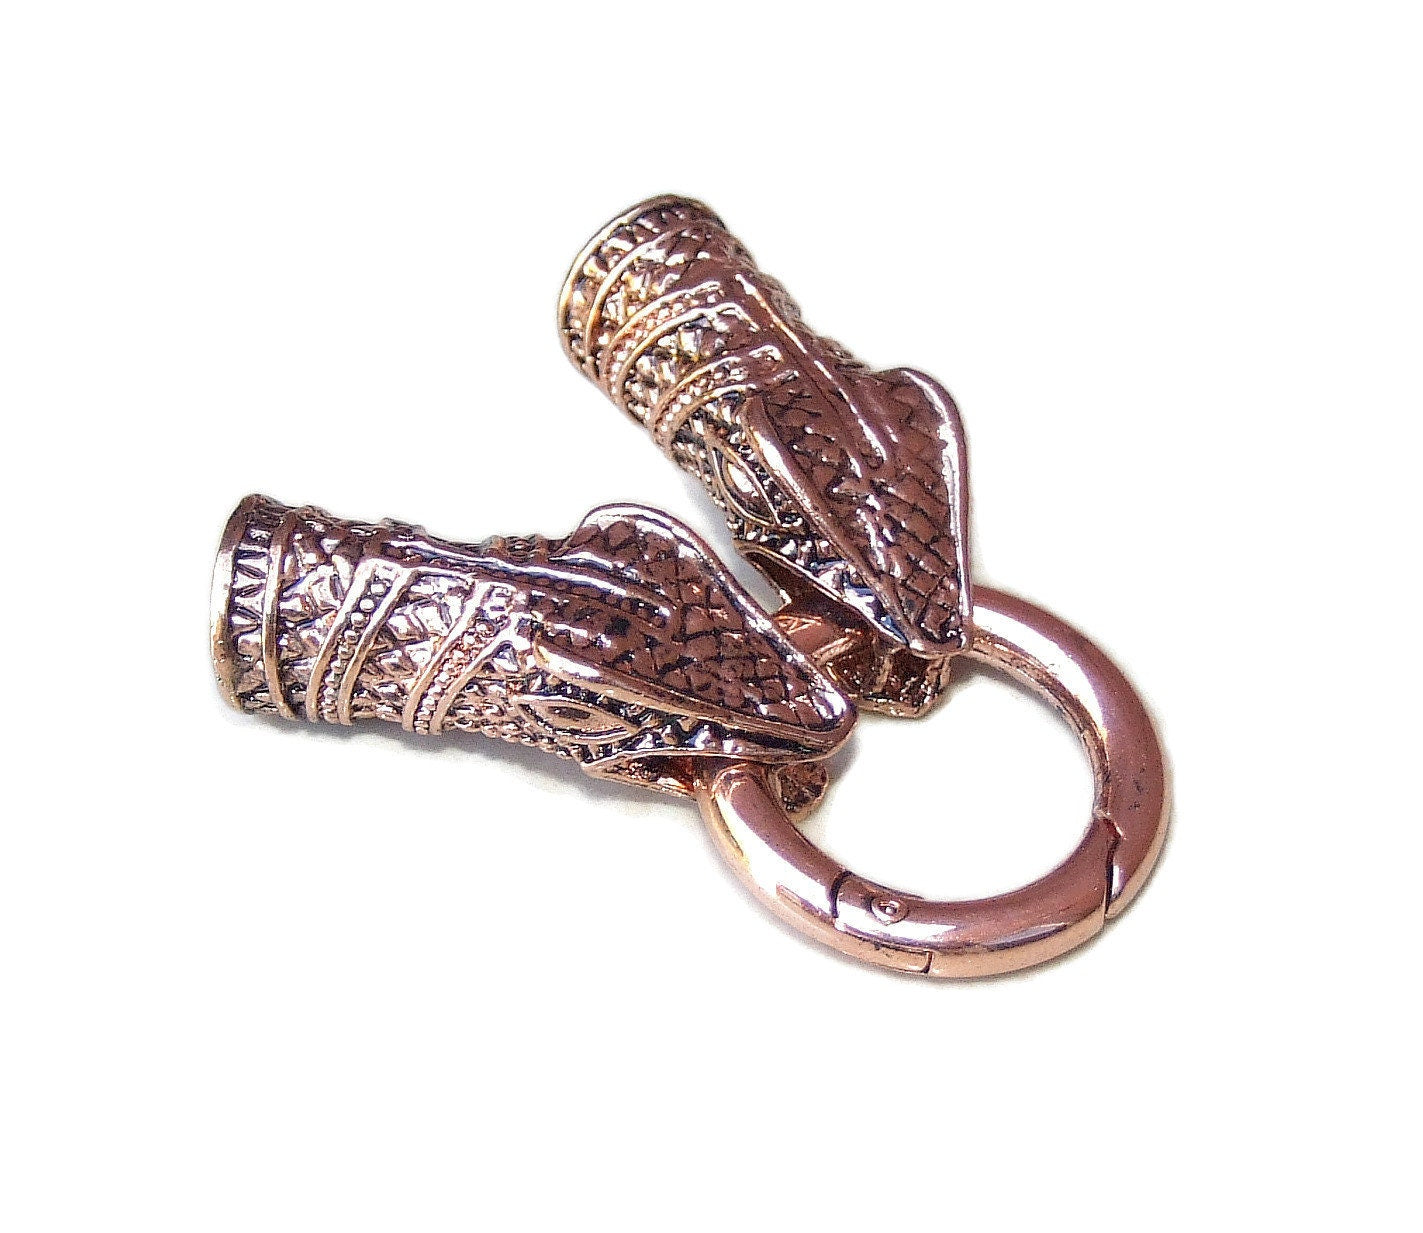 Snake Head Cord End Cap Clasp Lock Ring - Copper Tone - Dragon Head - Necklace Bracelet Clasp - Leather Cord End - Alloy - 11mm x 33mm